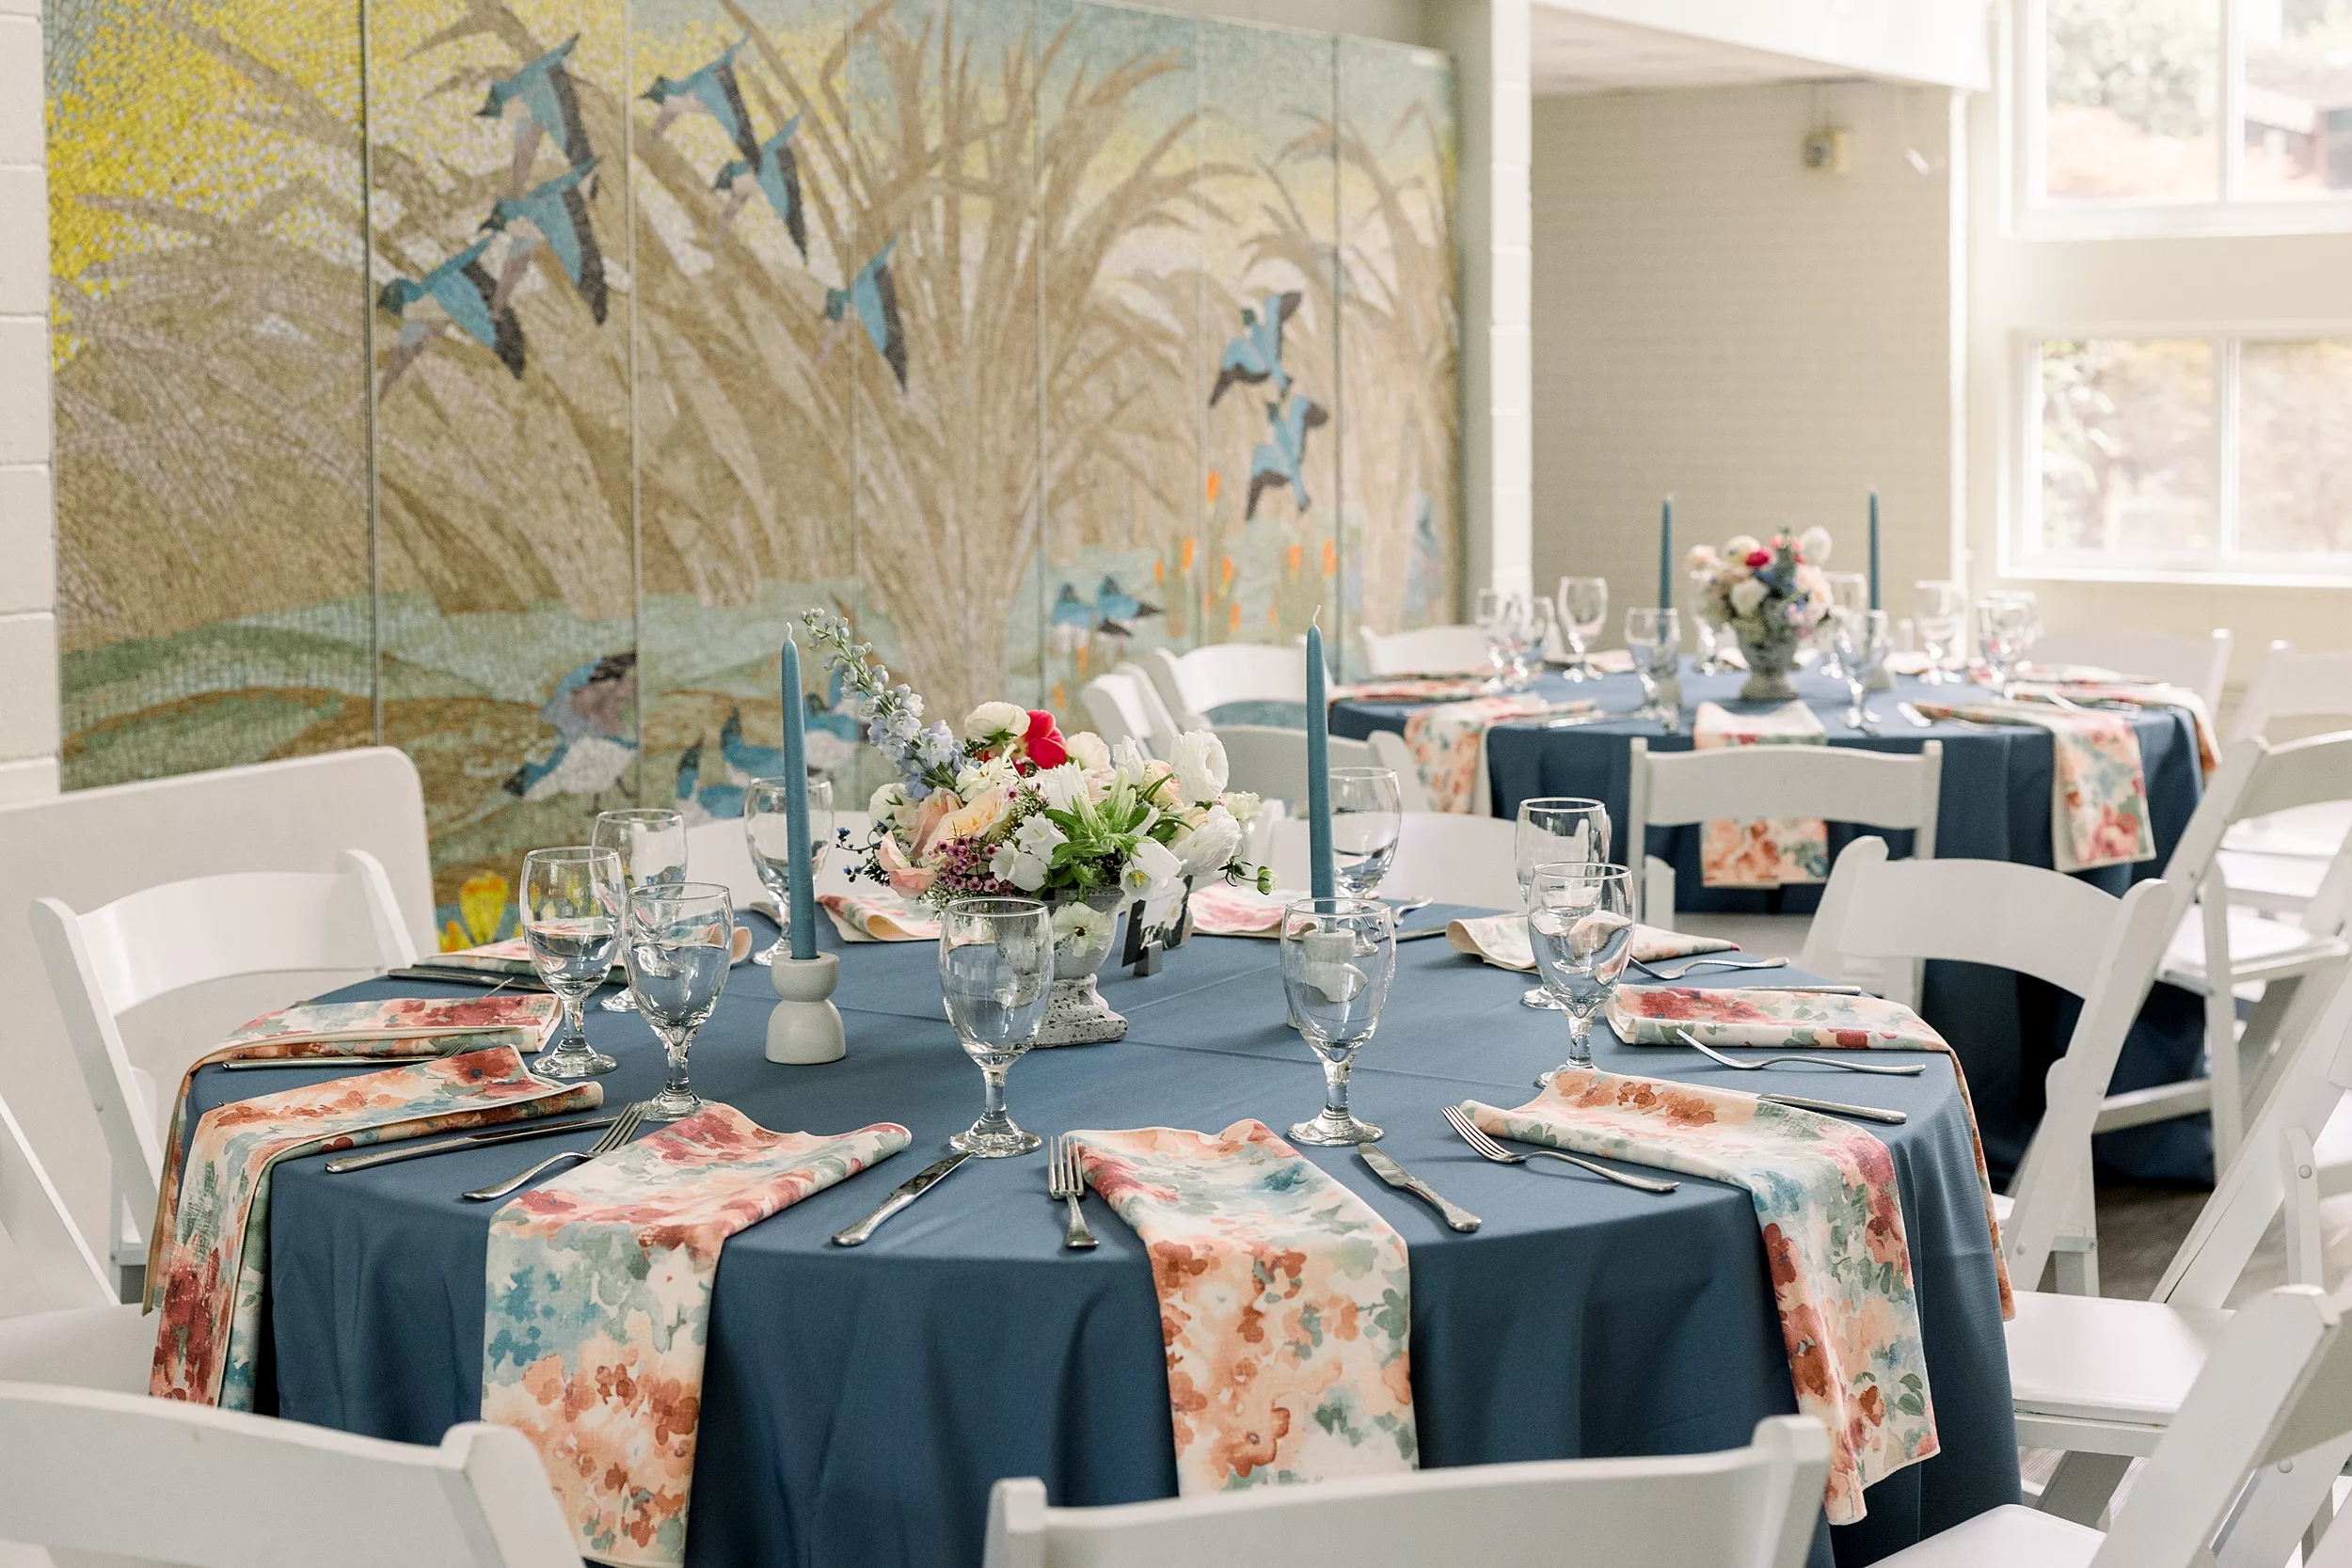 Details of a wedding reception table with a floral centerpiece